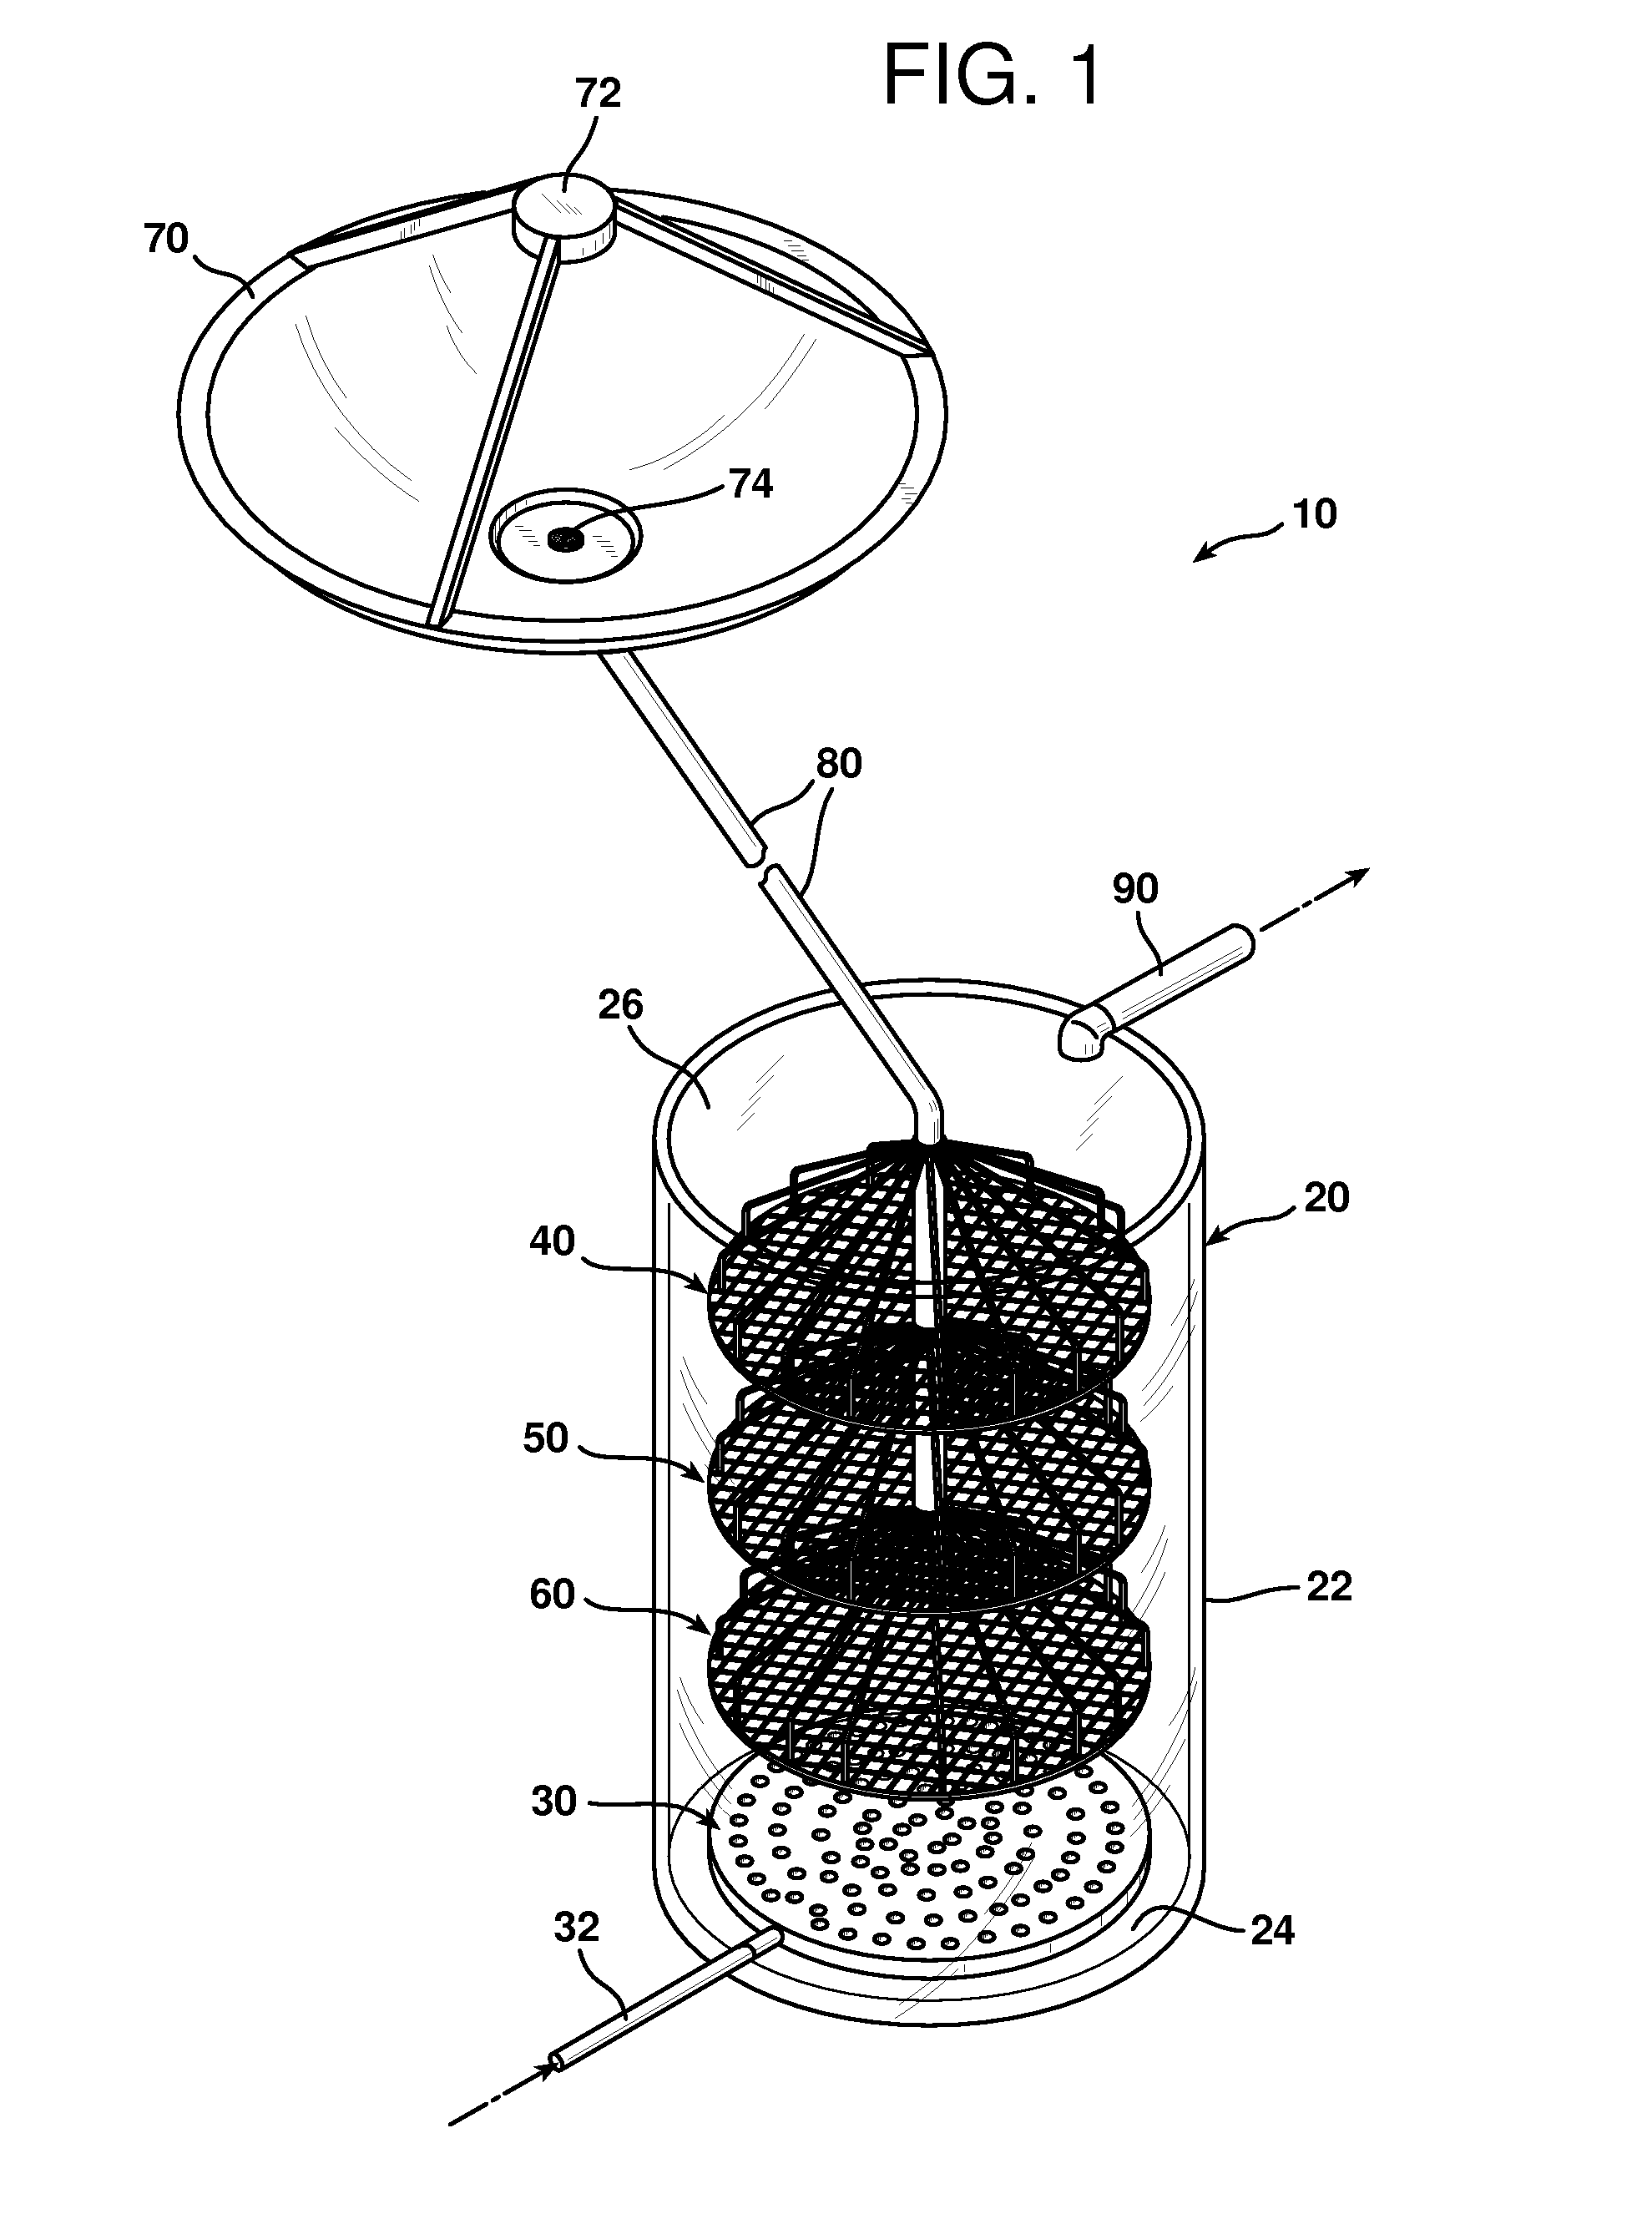 Apparatus and Method for Growing Biological Organisms for Fuel and Other Purposes